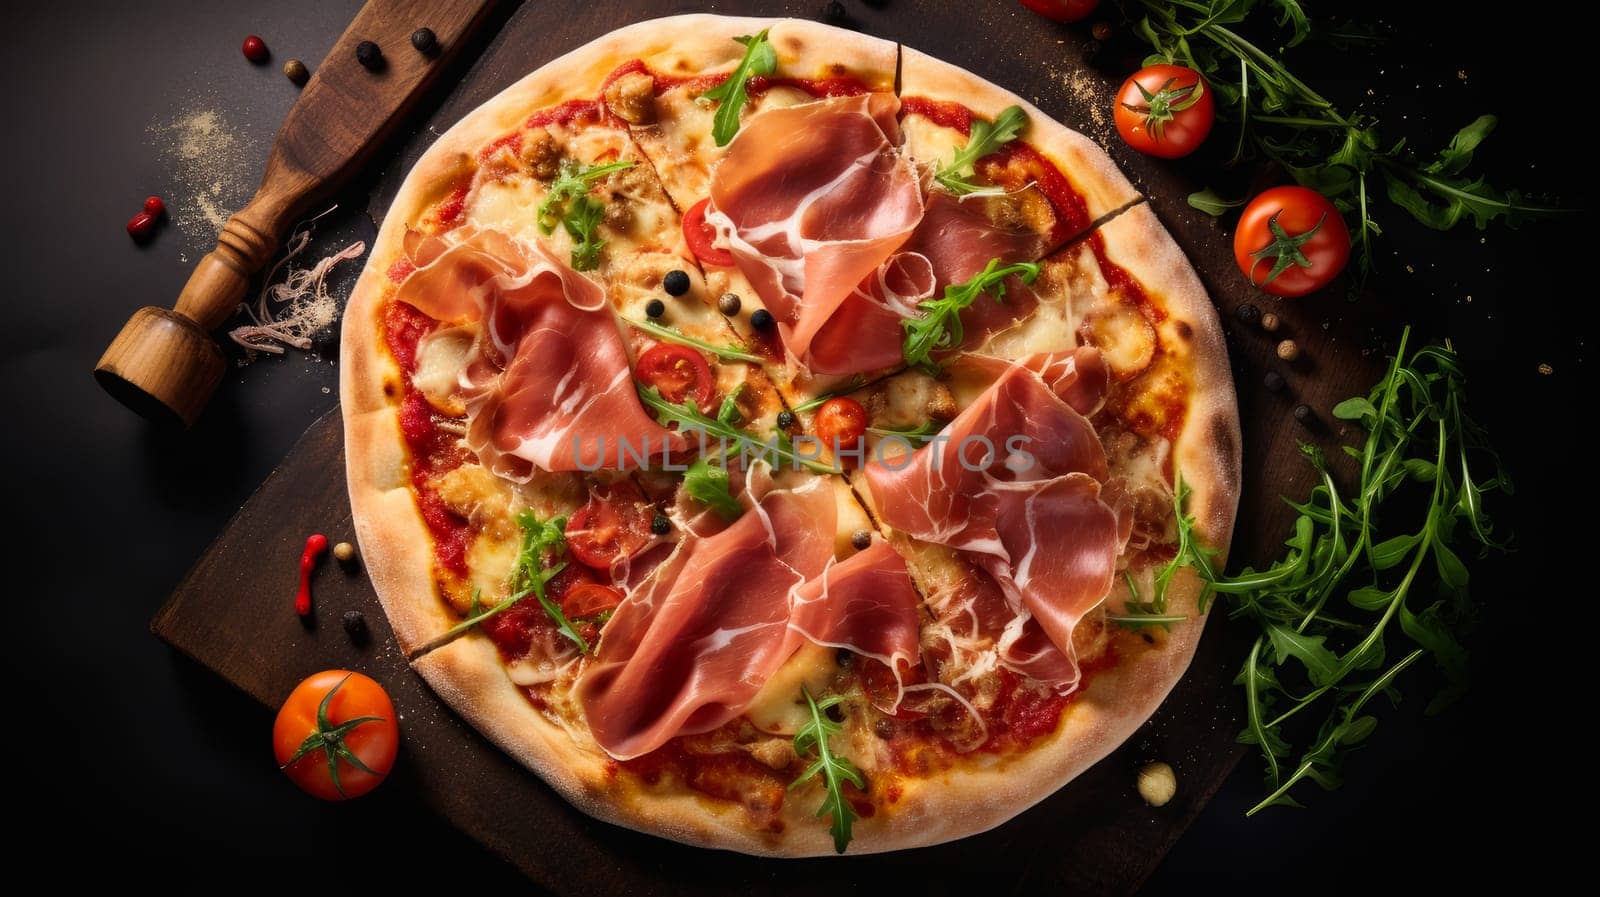 Delicious aromatic pizza with gooey cheese, salami, pepperoni, and basil, next to the ingredients on a dark table surface. by Alla_Yurtayeva